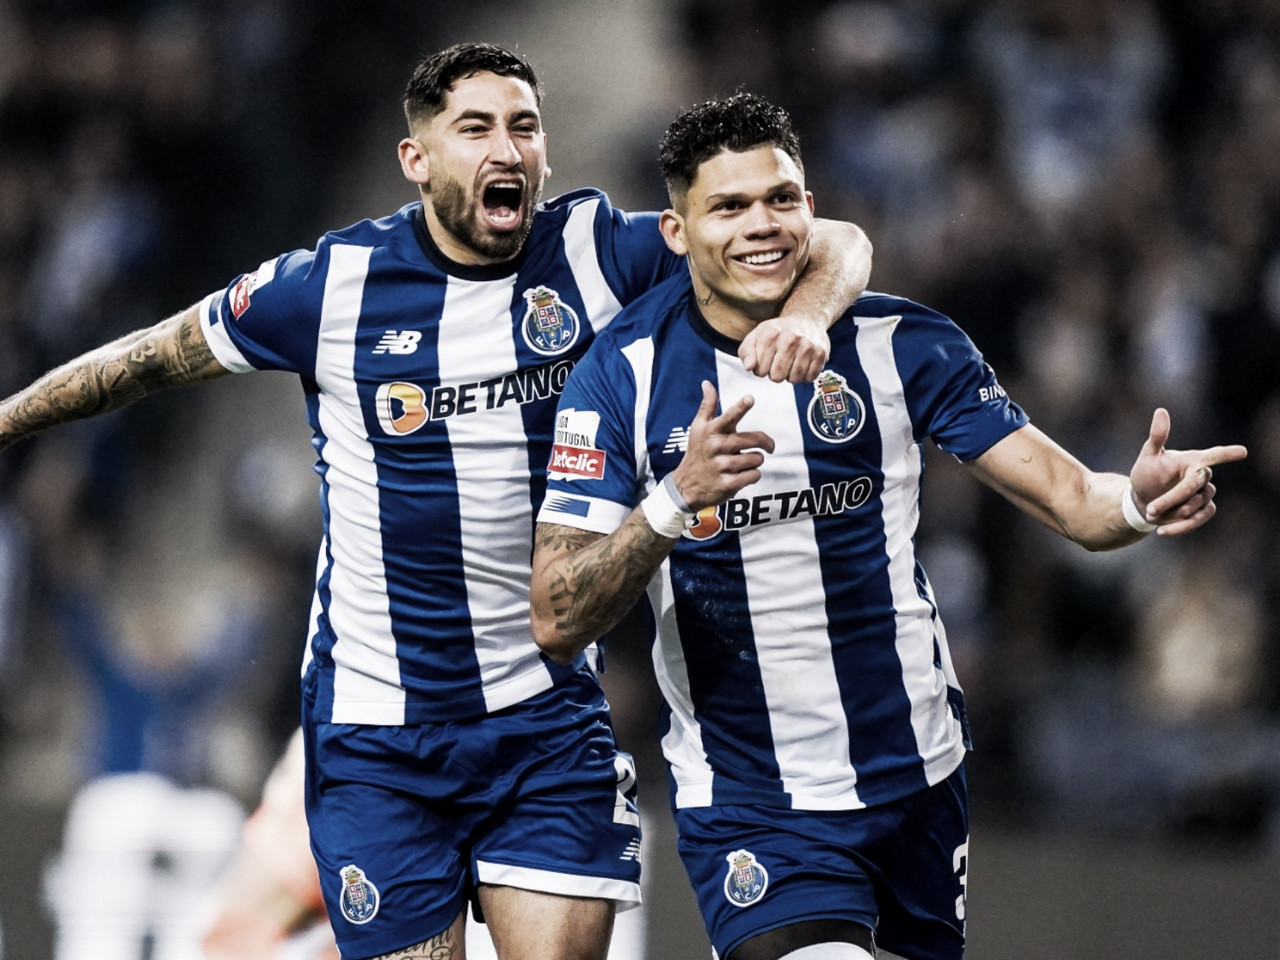 Goals and Highlights for Porto 2-2 Famalicão: Draw in an intense match